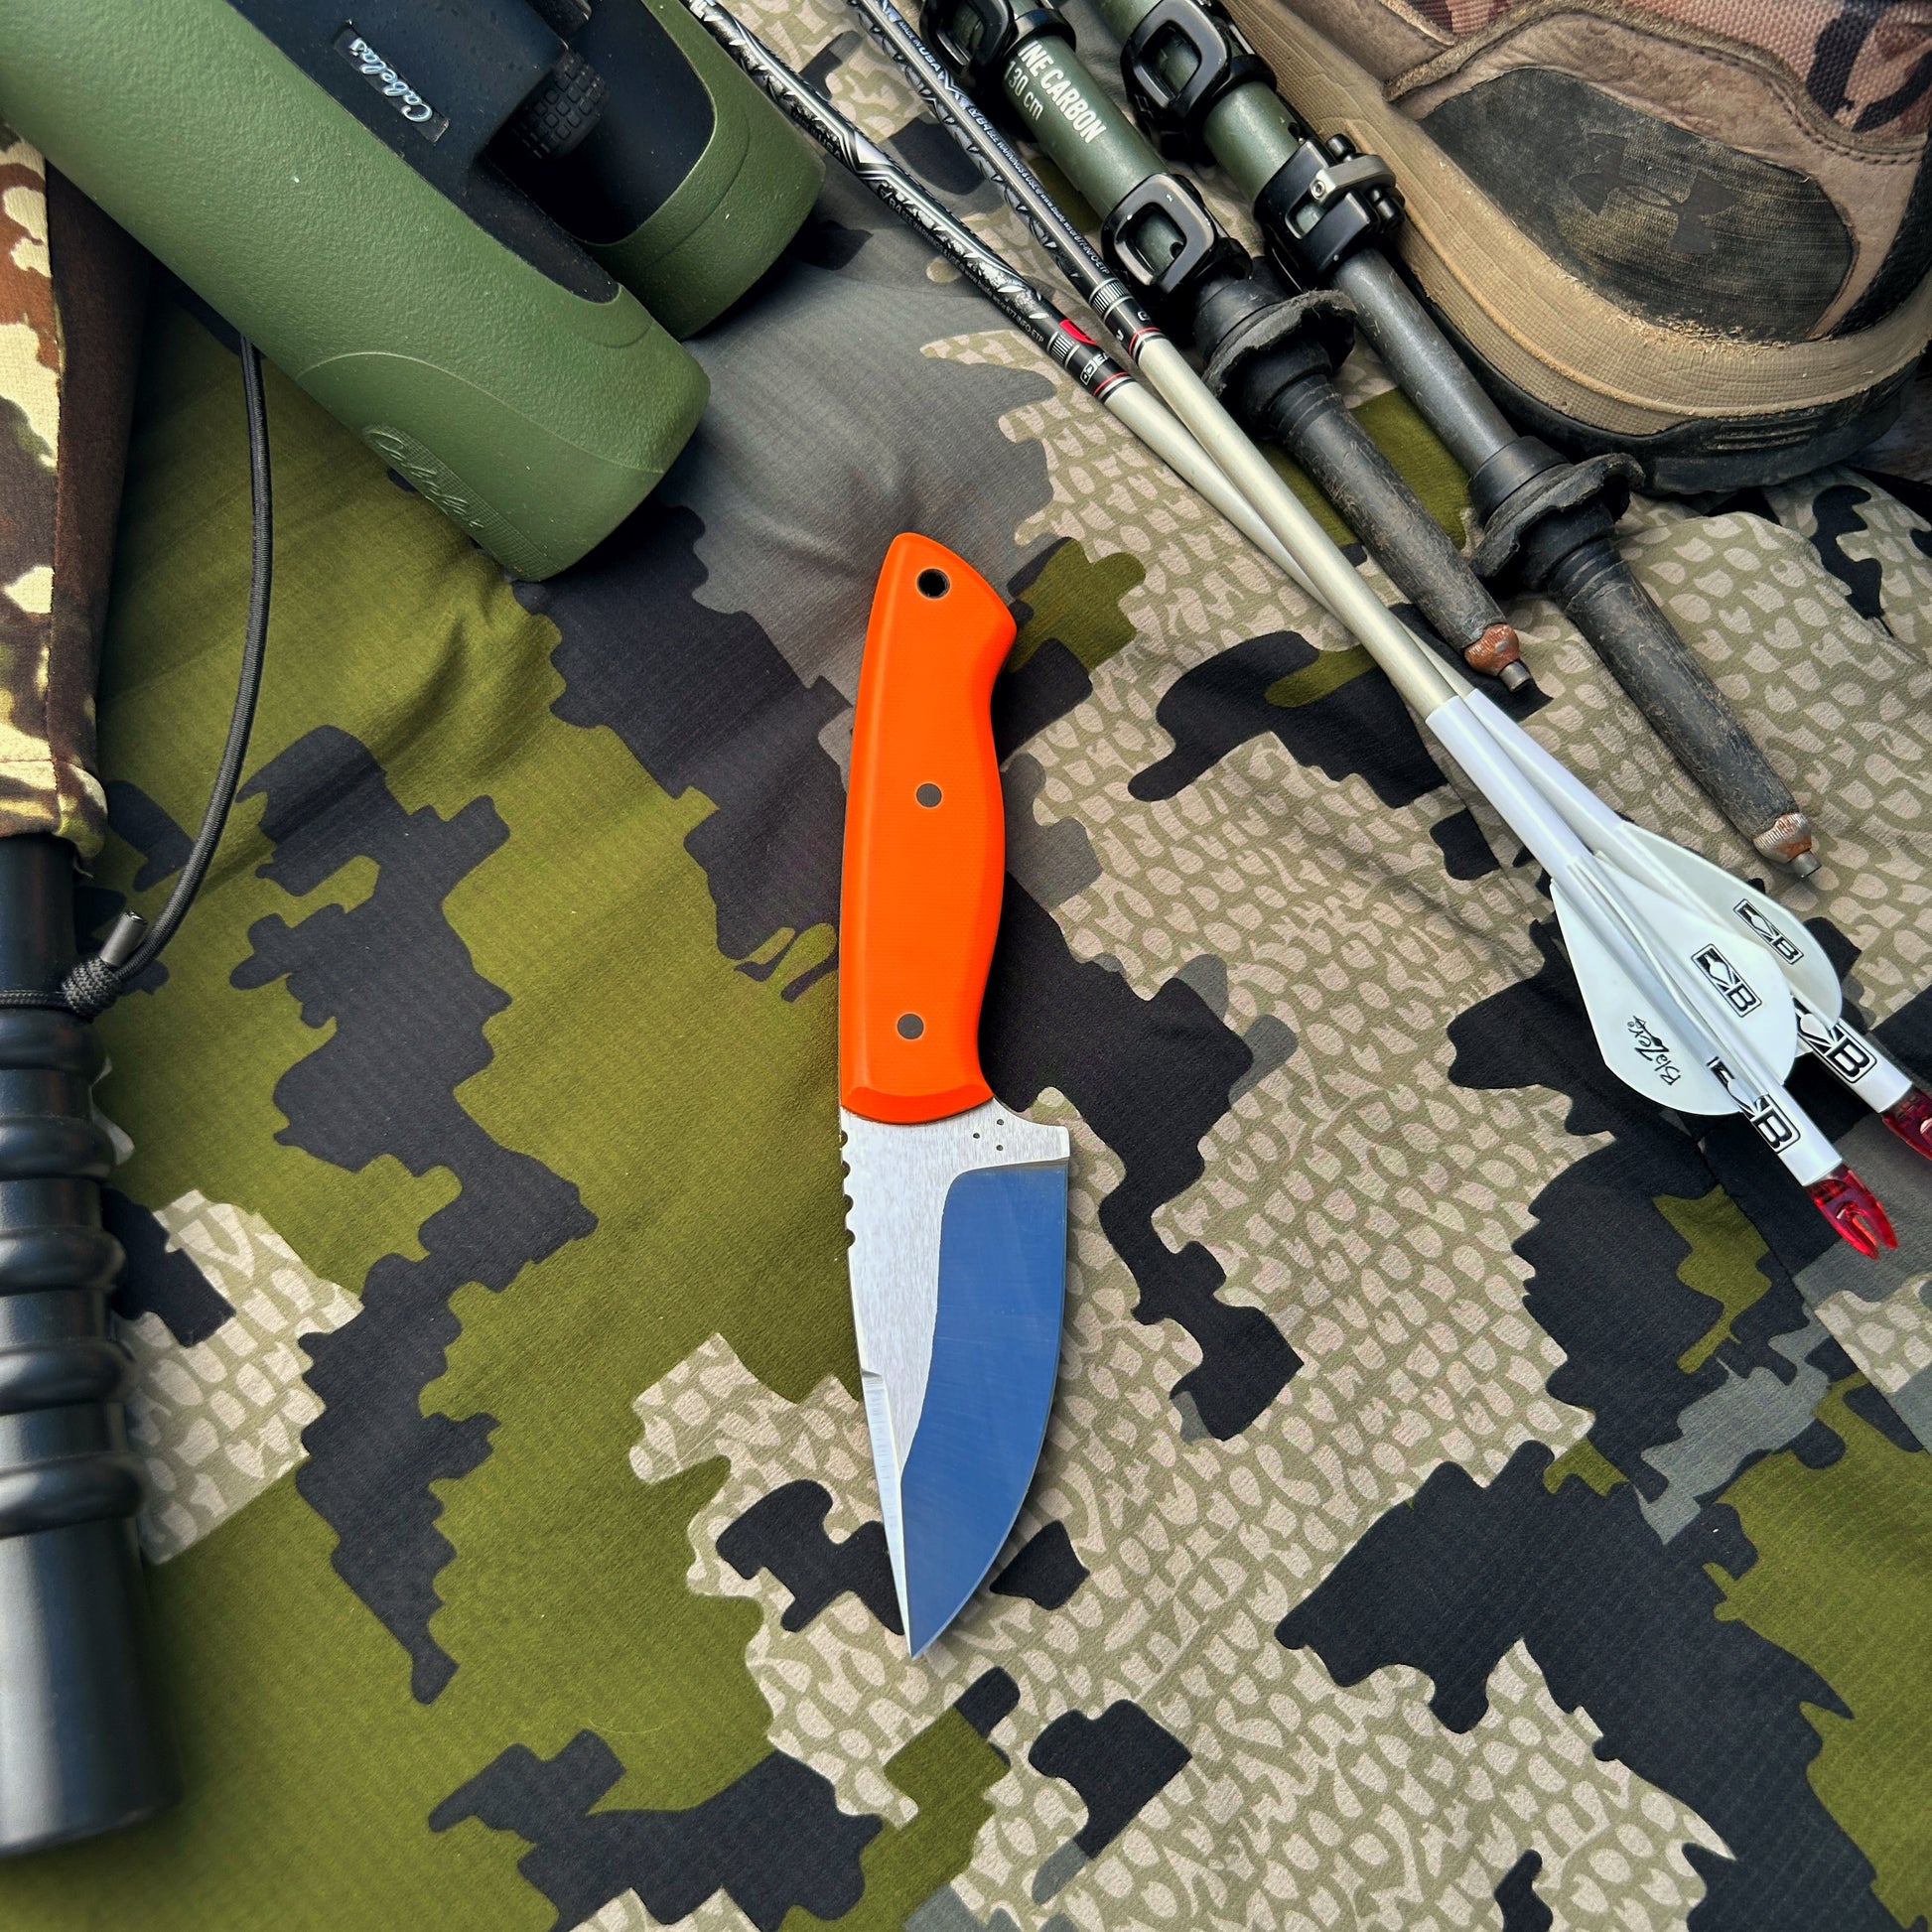 Orange handled drop point hunter knife pictured with hunting gear. Great gift for any outdoorsman 